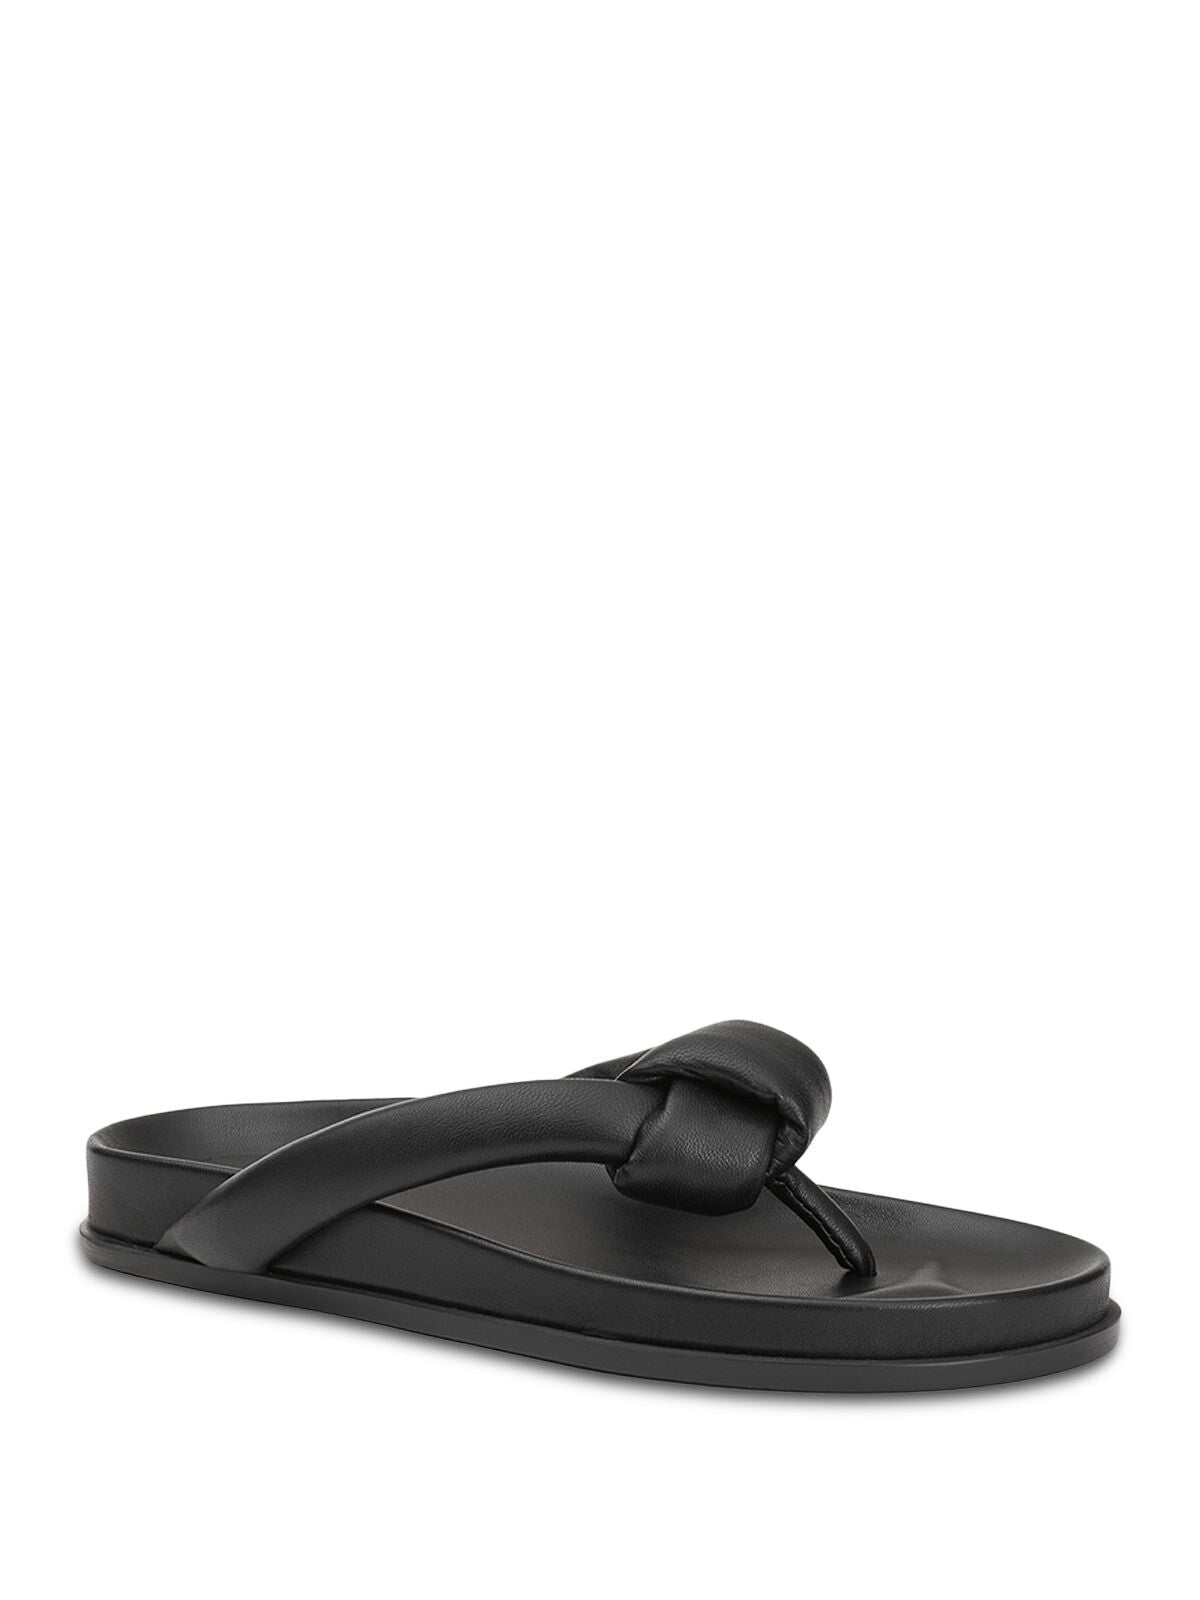 LAFAYETTE 148 NEW YORK Womens Black Knotted Strap Comfort Bristol Almond Toe Slip On Leather Thong Sandals Shoes 36